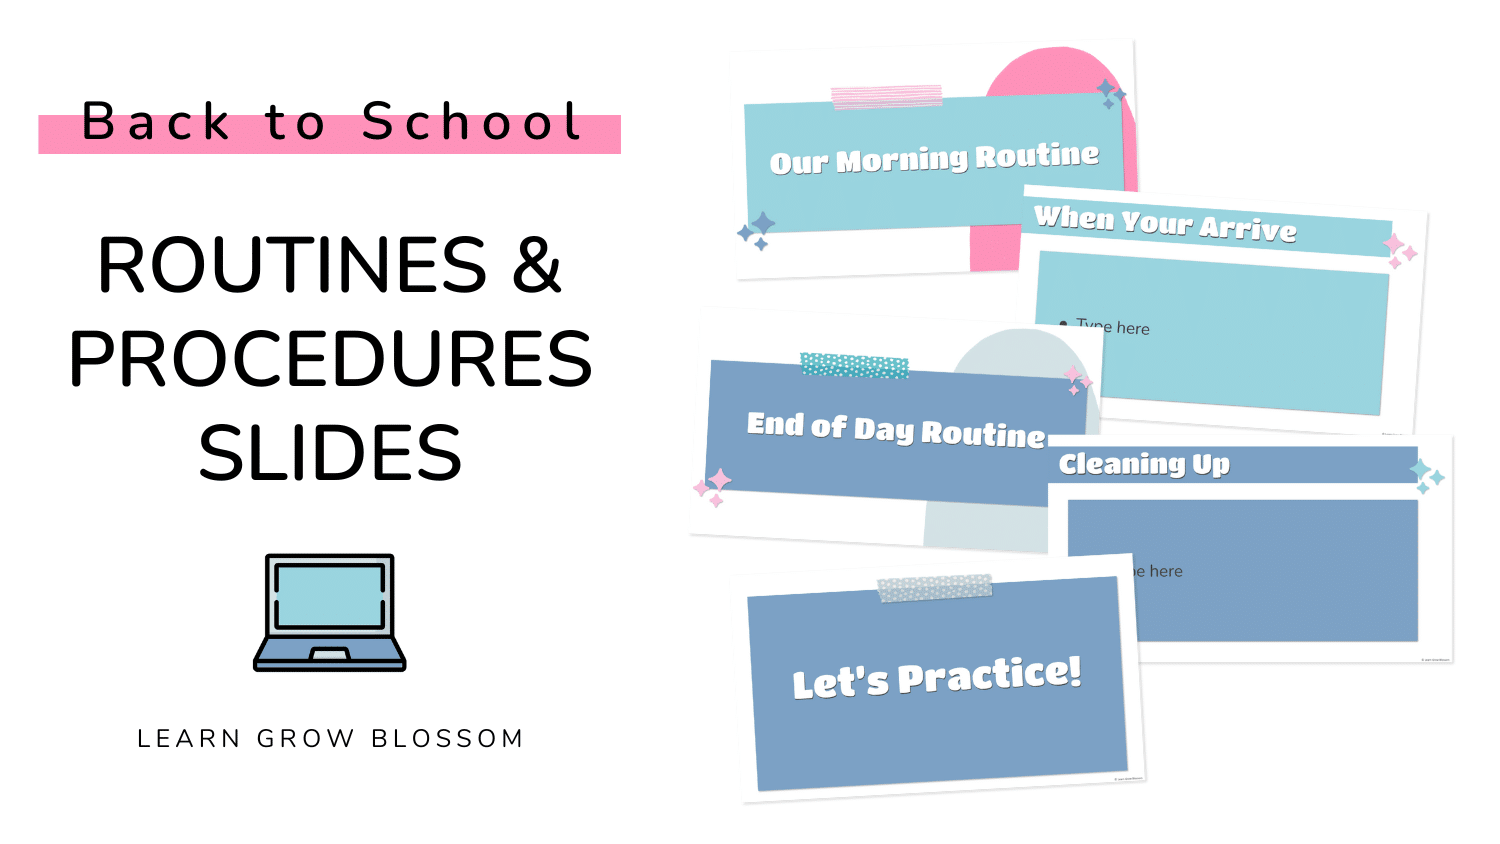 Screenshots of back to school classroom routines and procedures slides